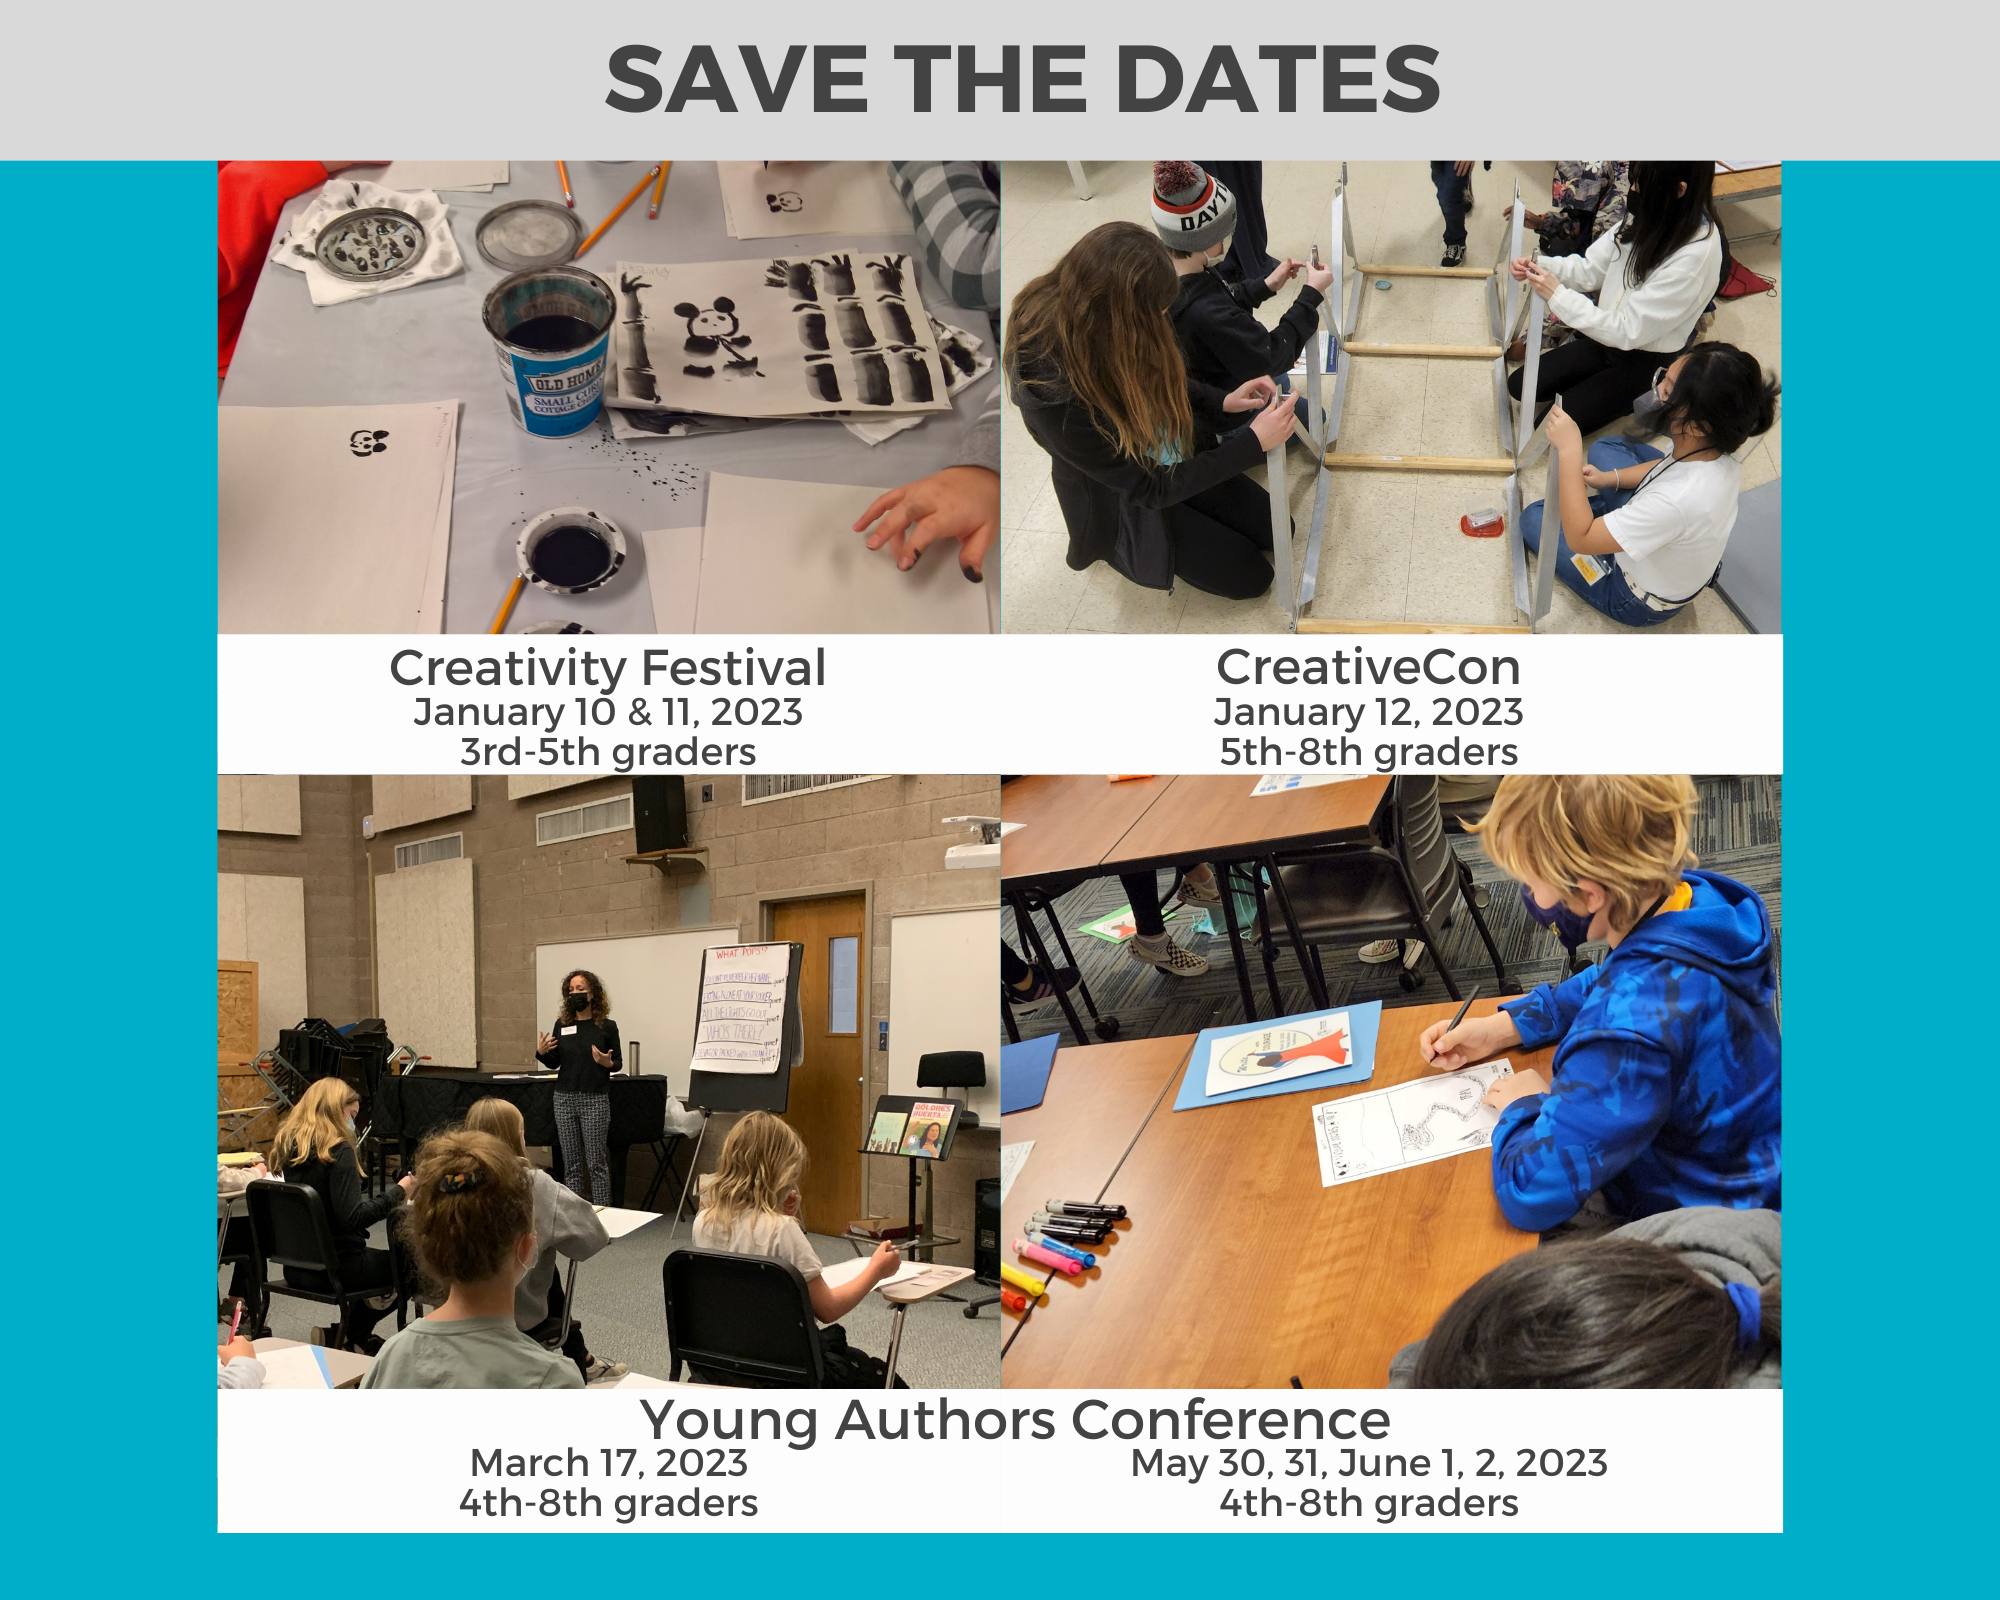 Save the dates for Success Beyond the Classroom's 2023 programs